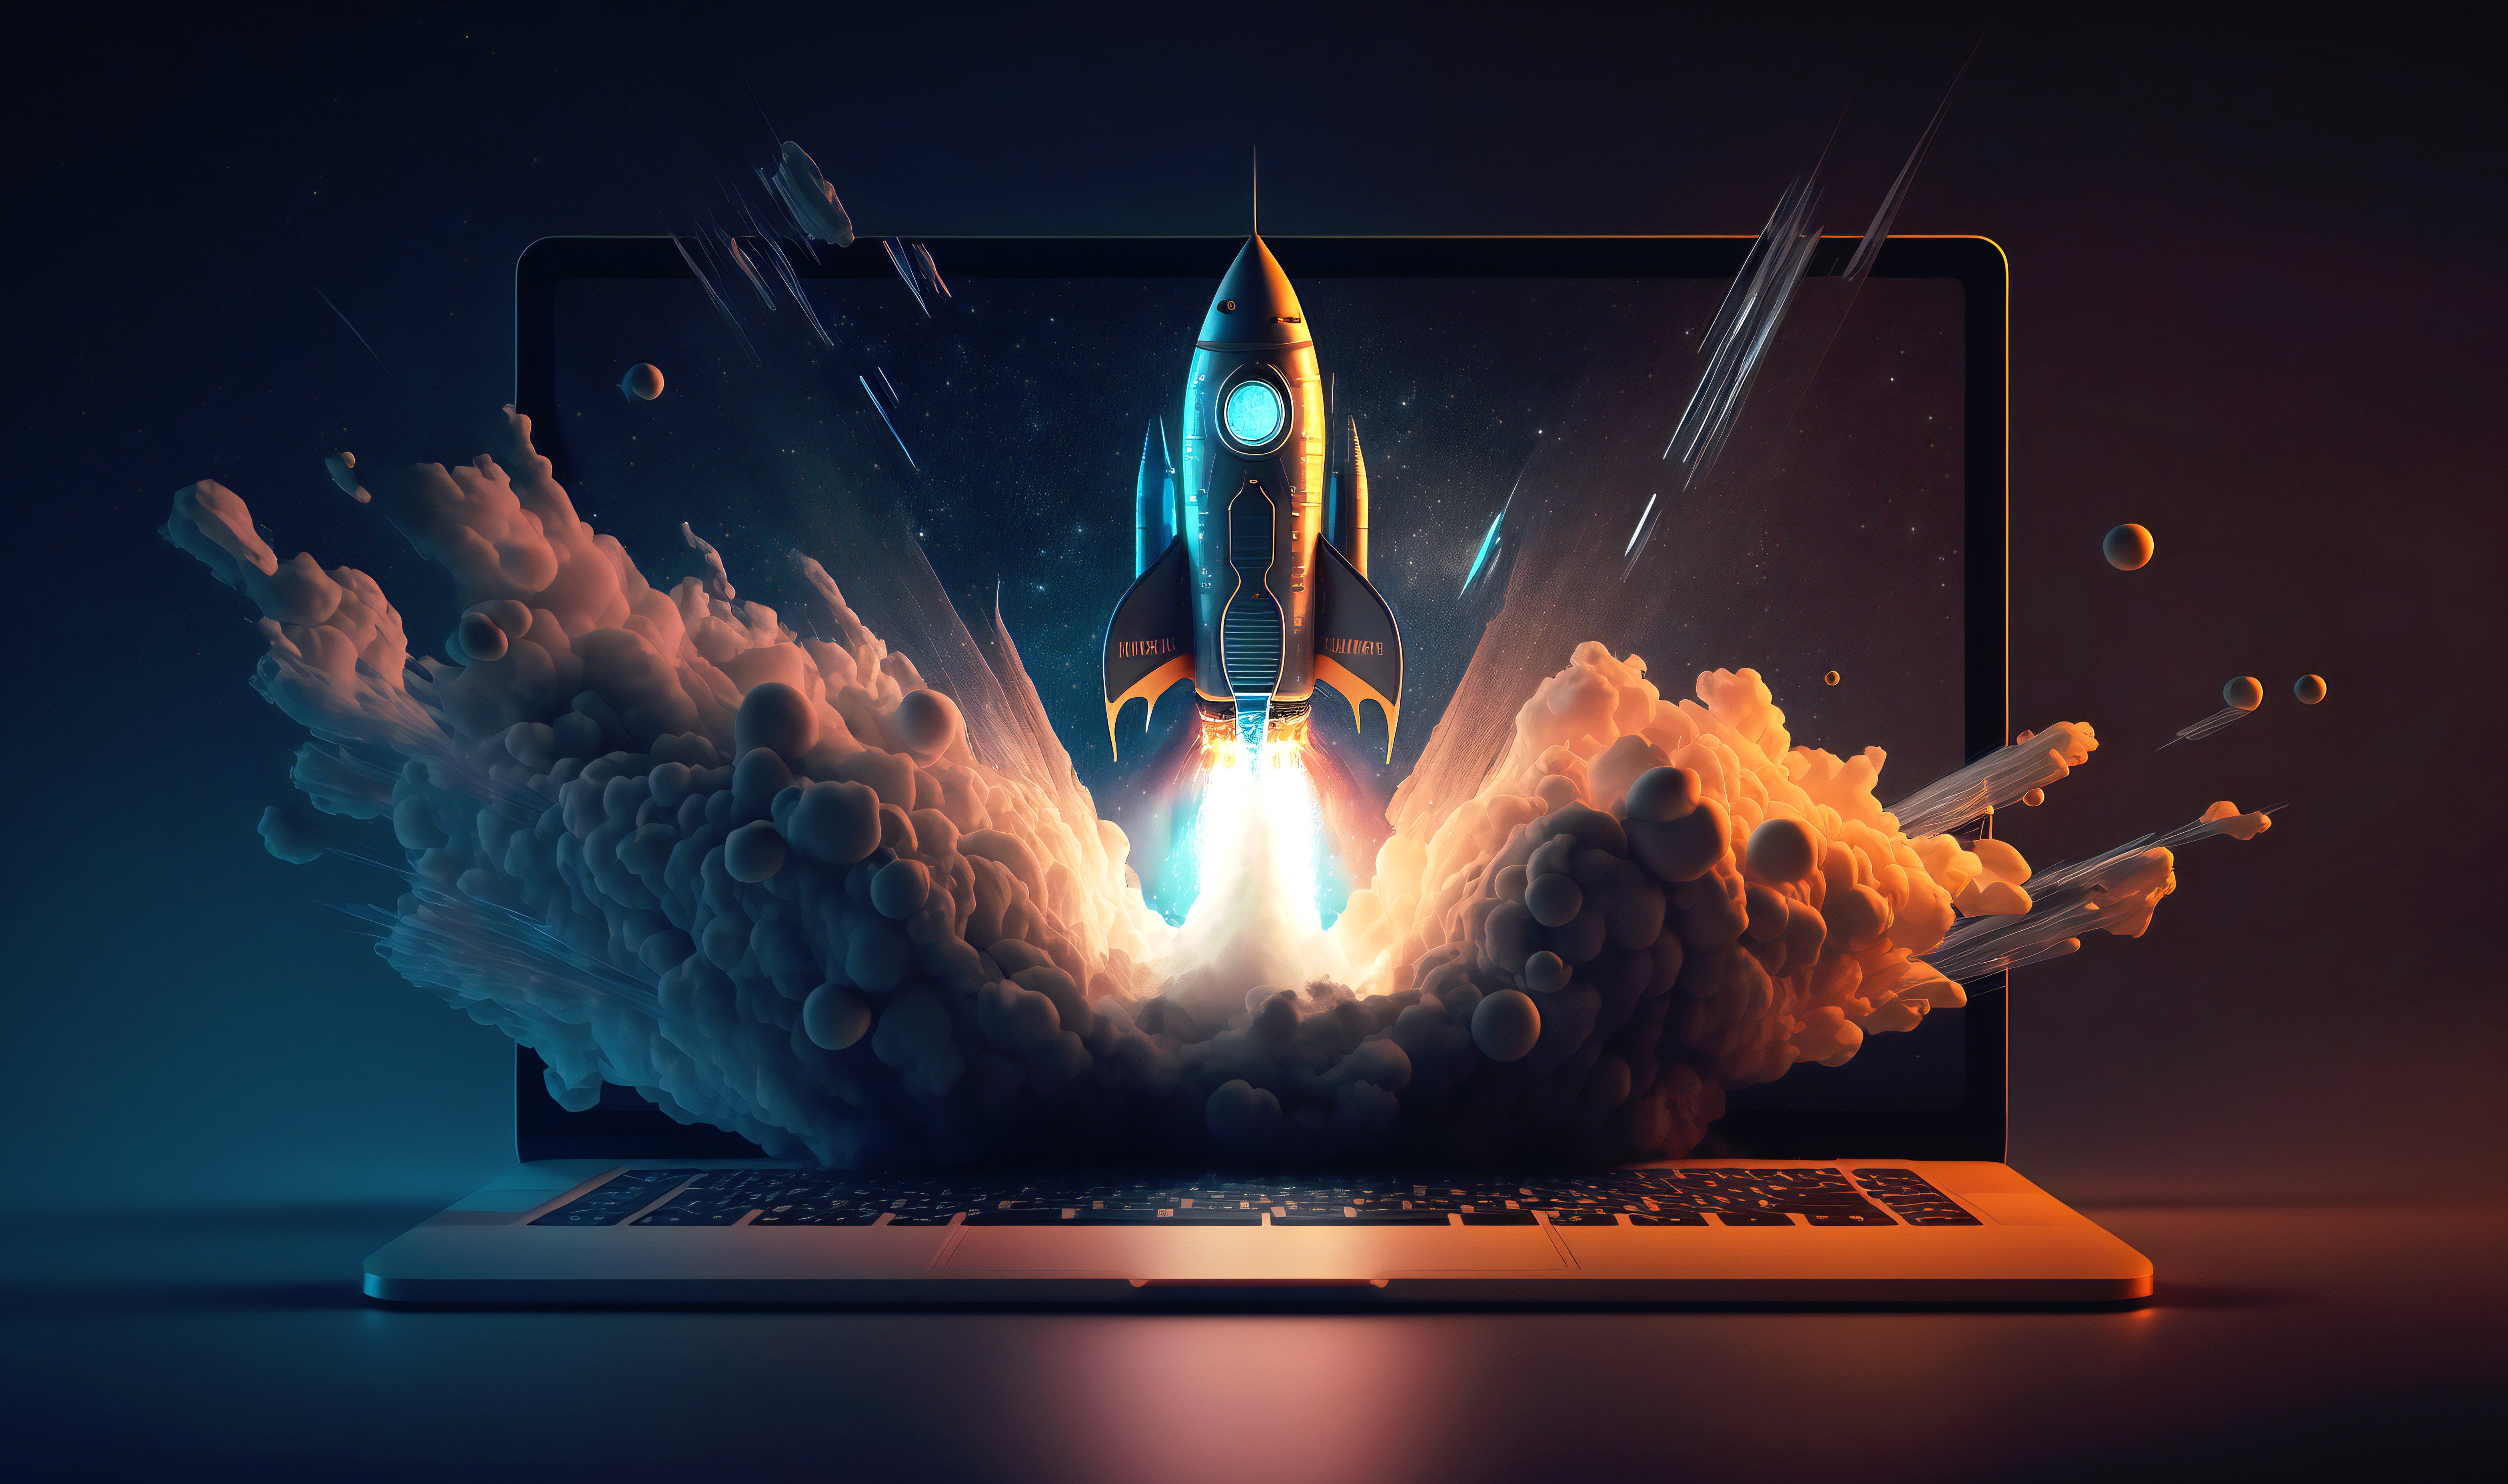 Startup Rocket coming out of Macbook screen. 